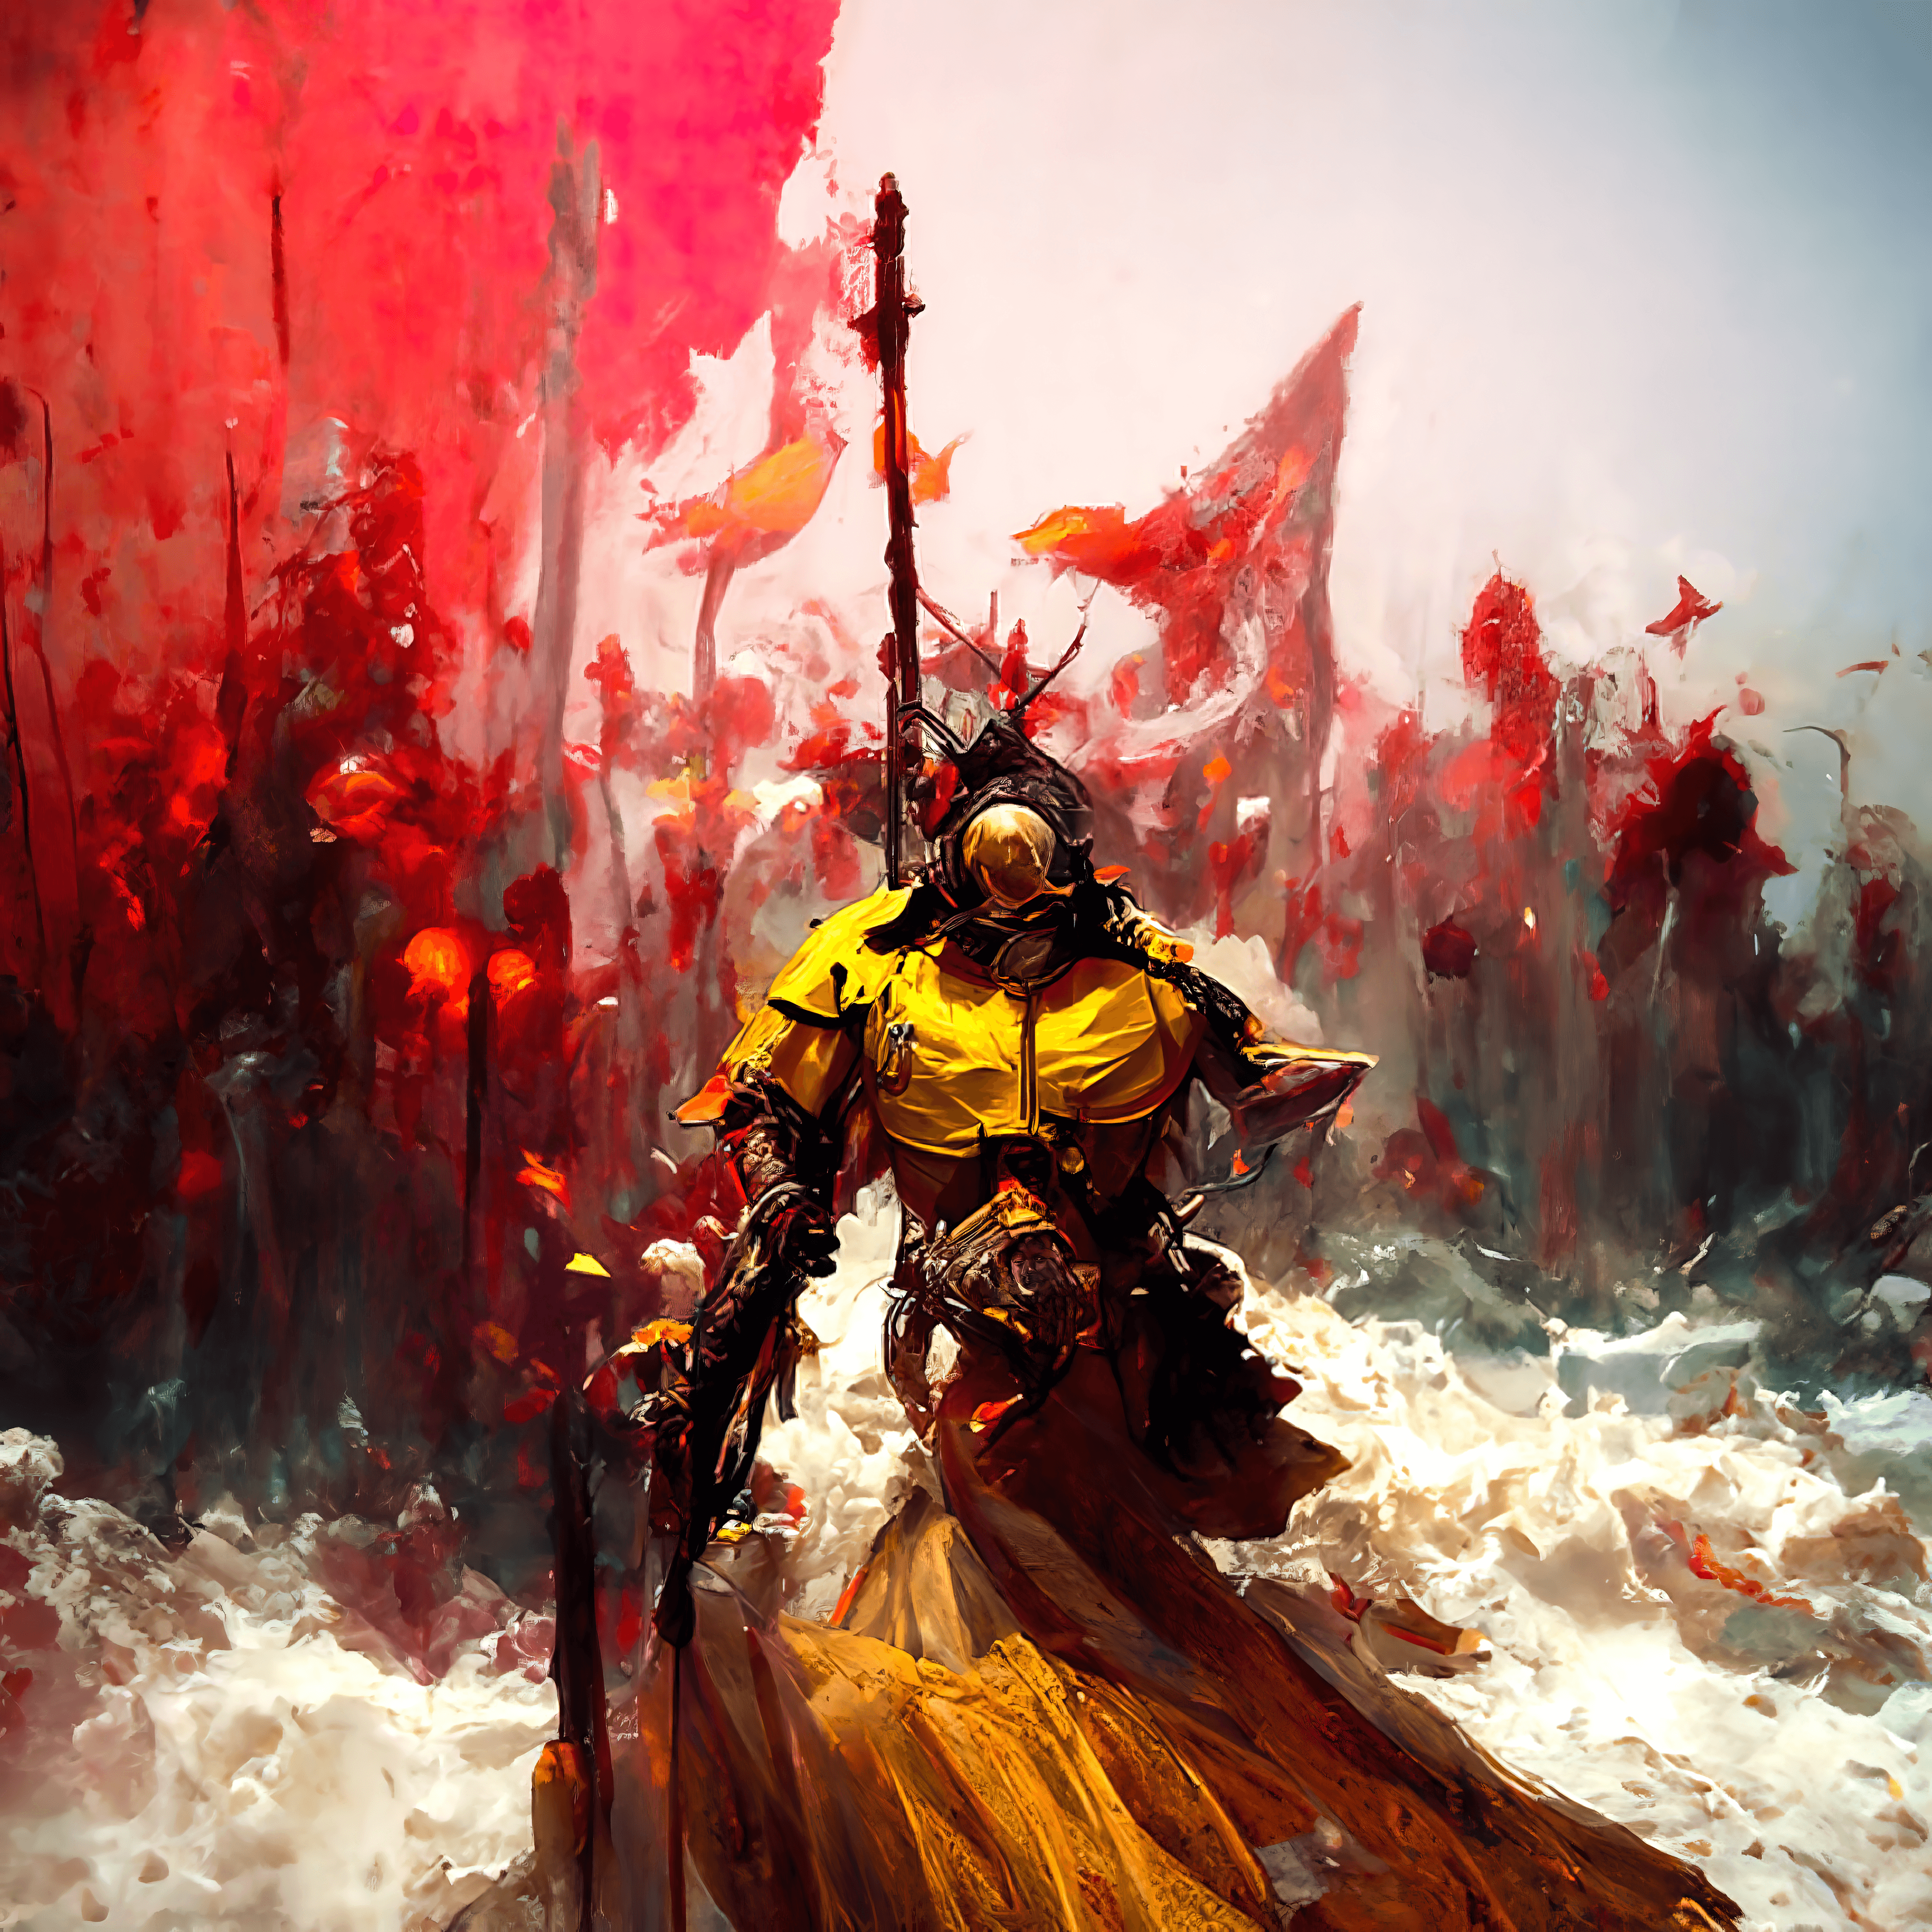 Warrior In A Sea Of Blood #2